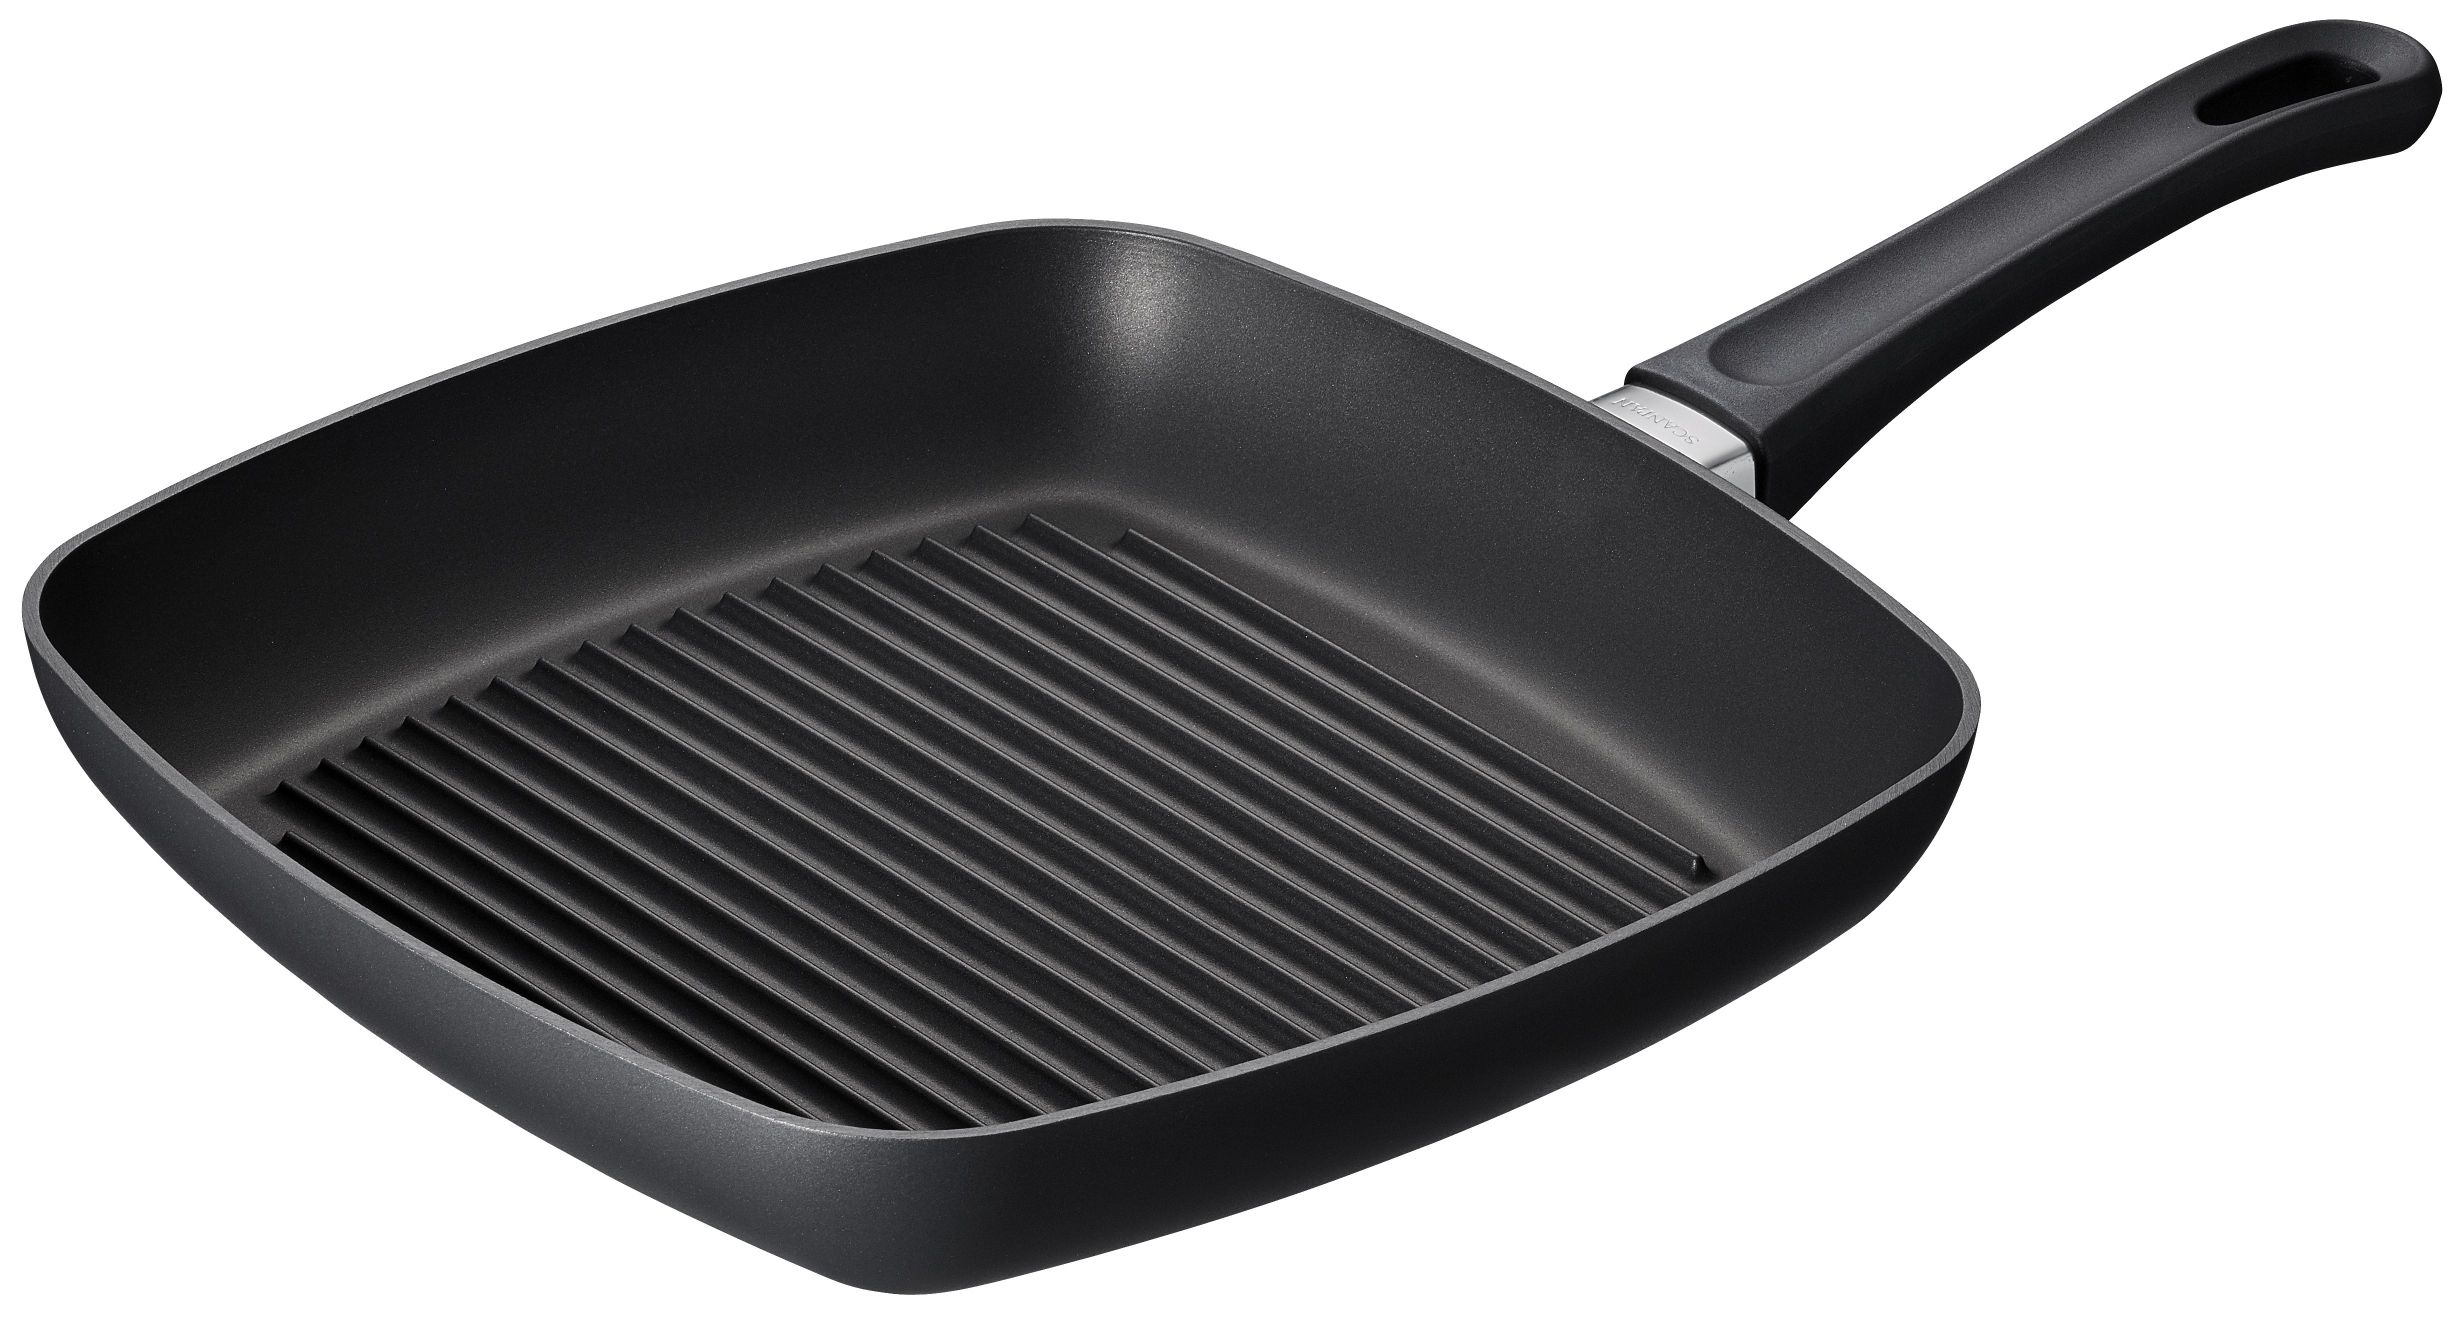  Classic Induction Grillpande